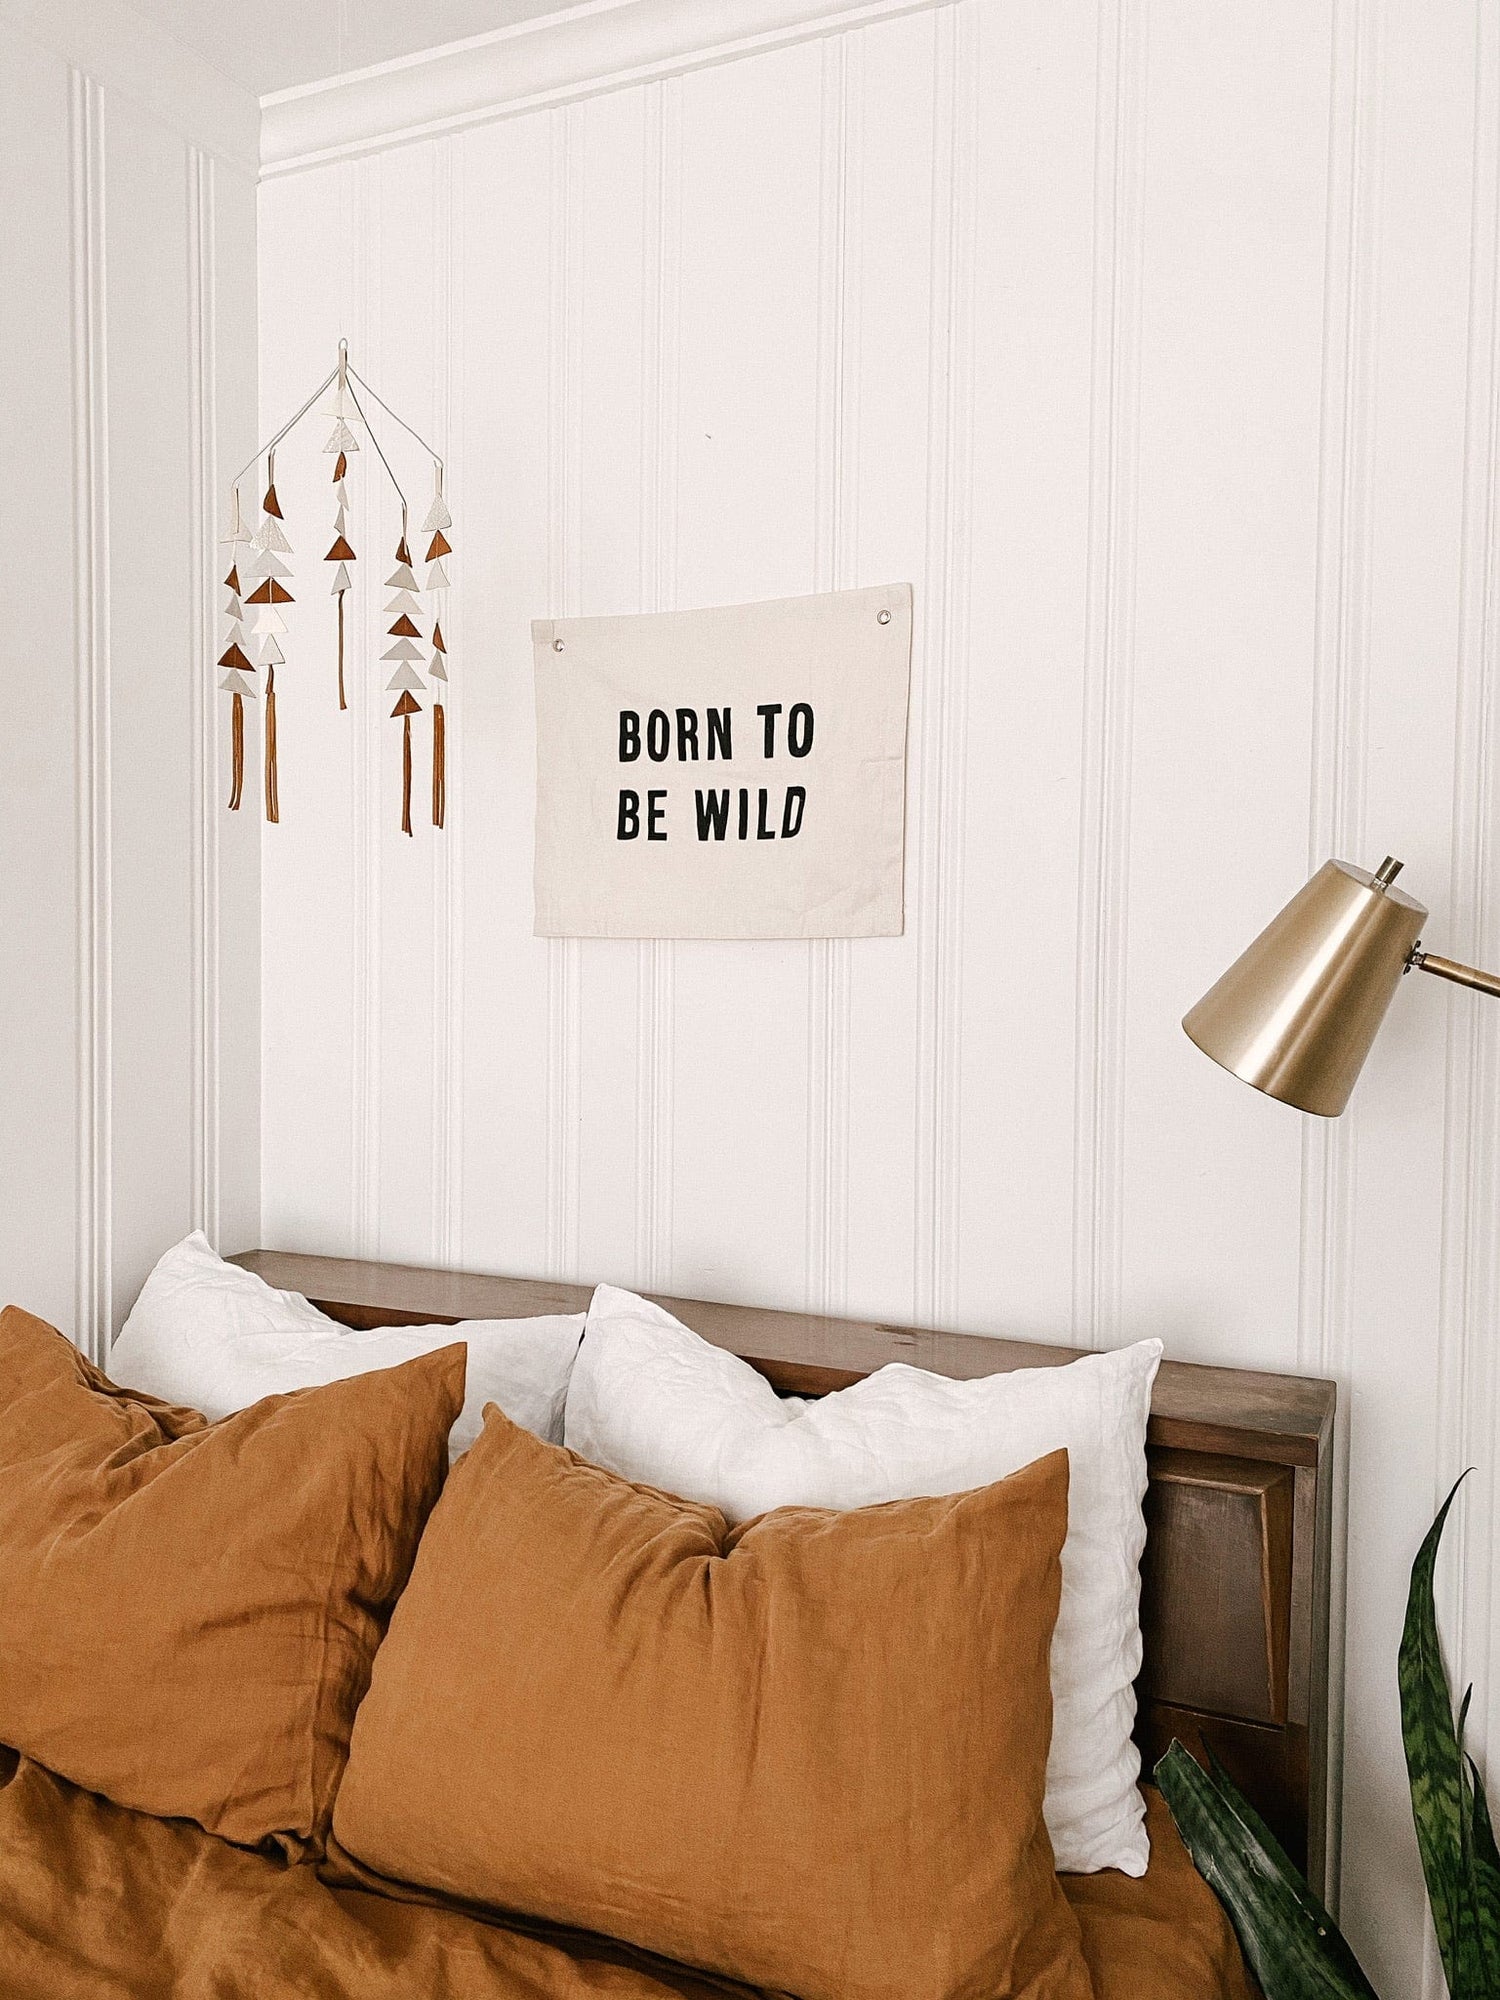 Imani Collective Décor Born To Be Wild Banner